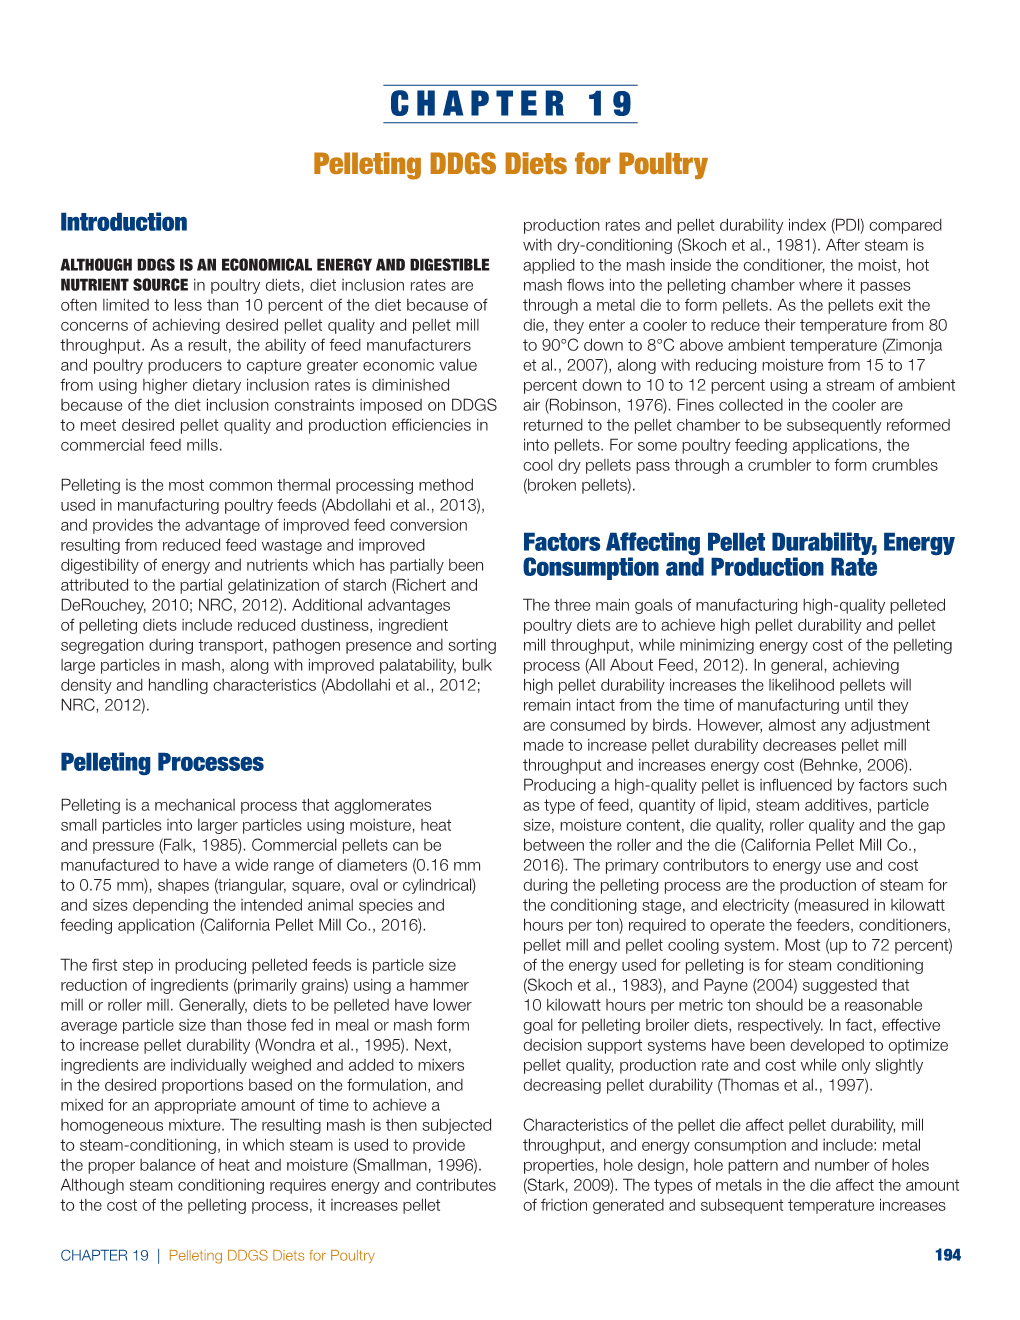 Chapter 19: Pelleting DDGS Diets for Poultry